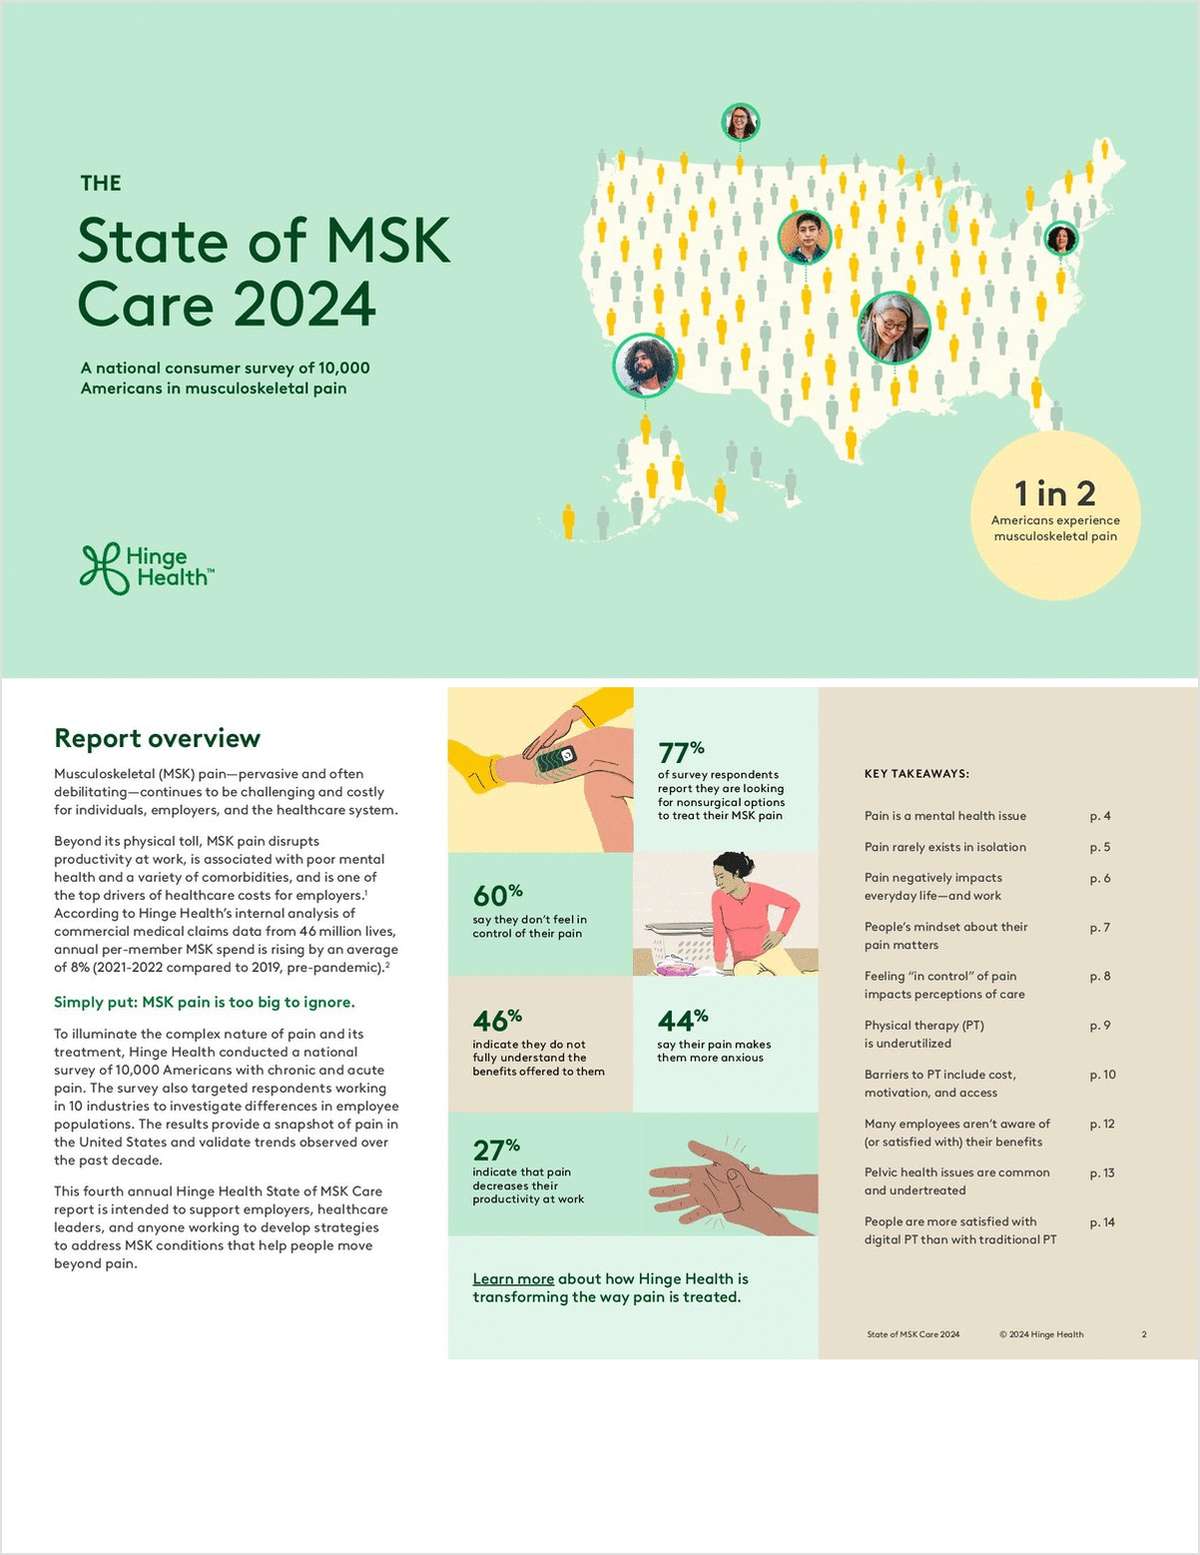 The State of MSK Care 2024